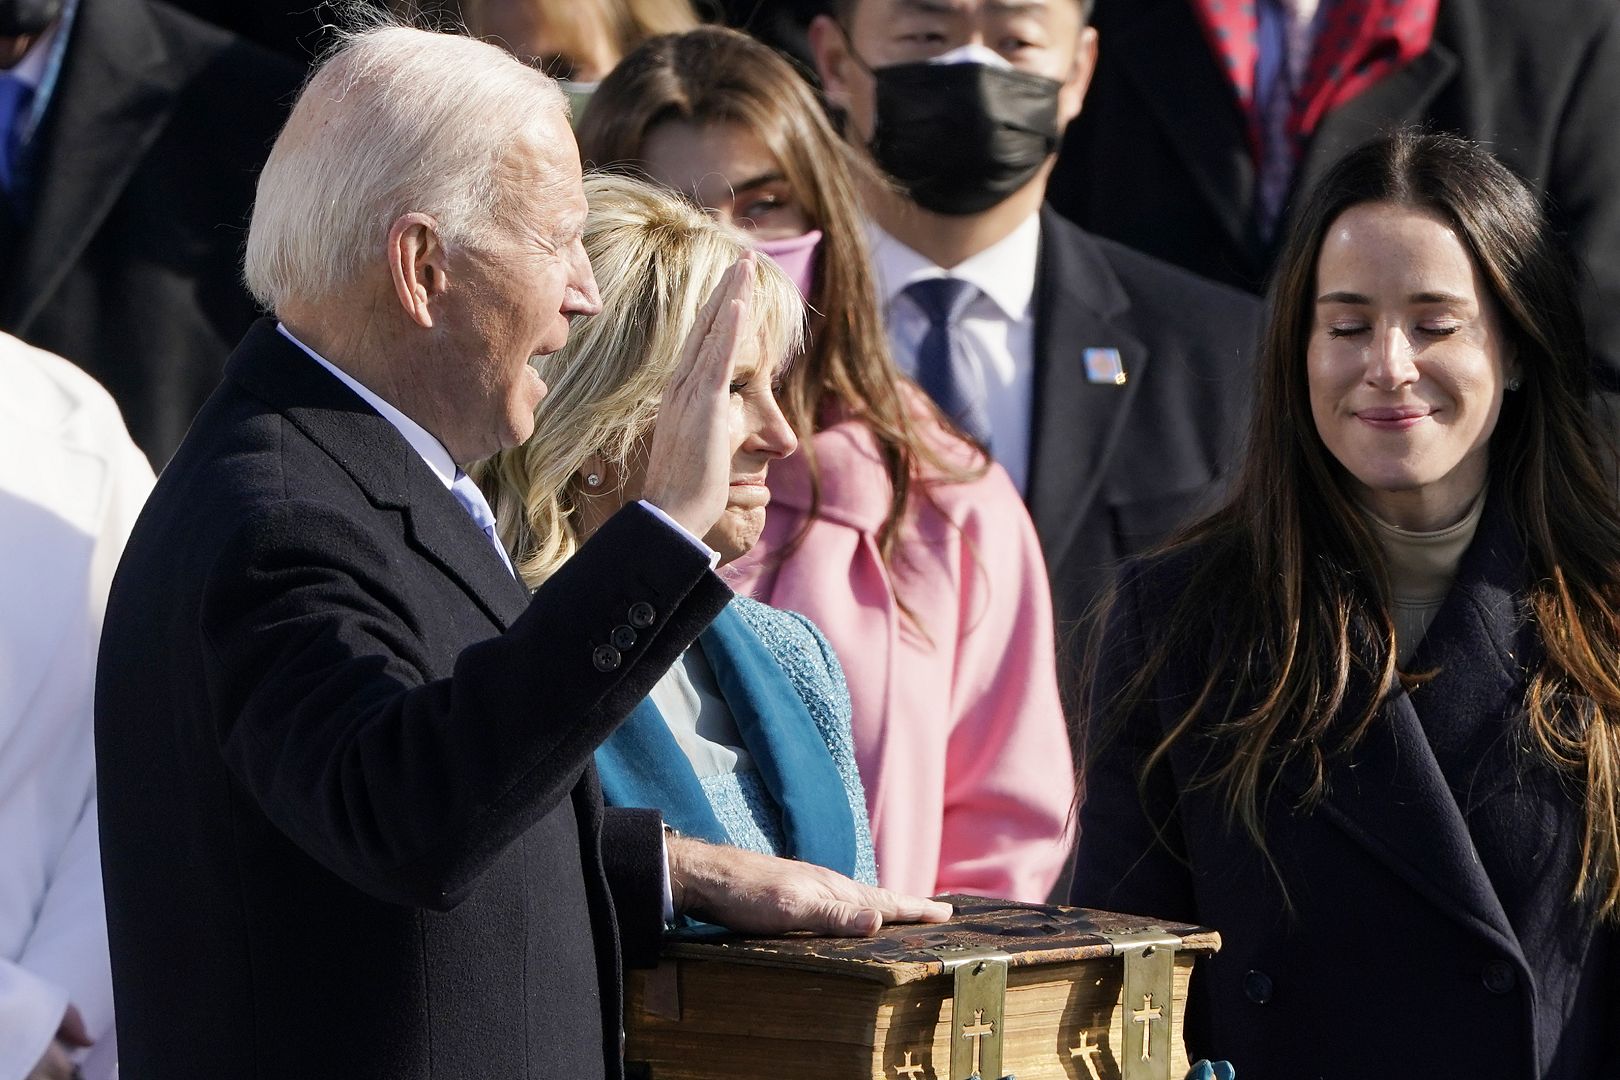 Joe Biden, flanked by incoming US First Lady Jill Biden is sworn in as the 46th US President by Supreme Court Chief Justice John Roberts. January 20, 2021